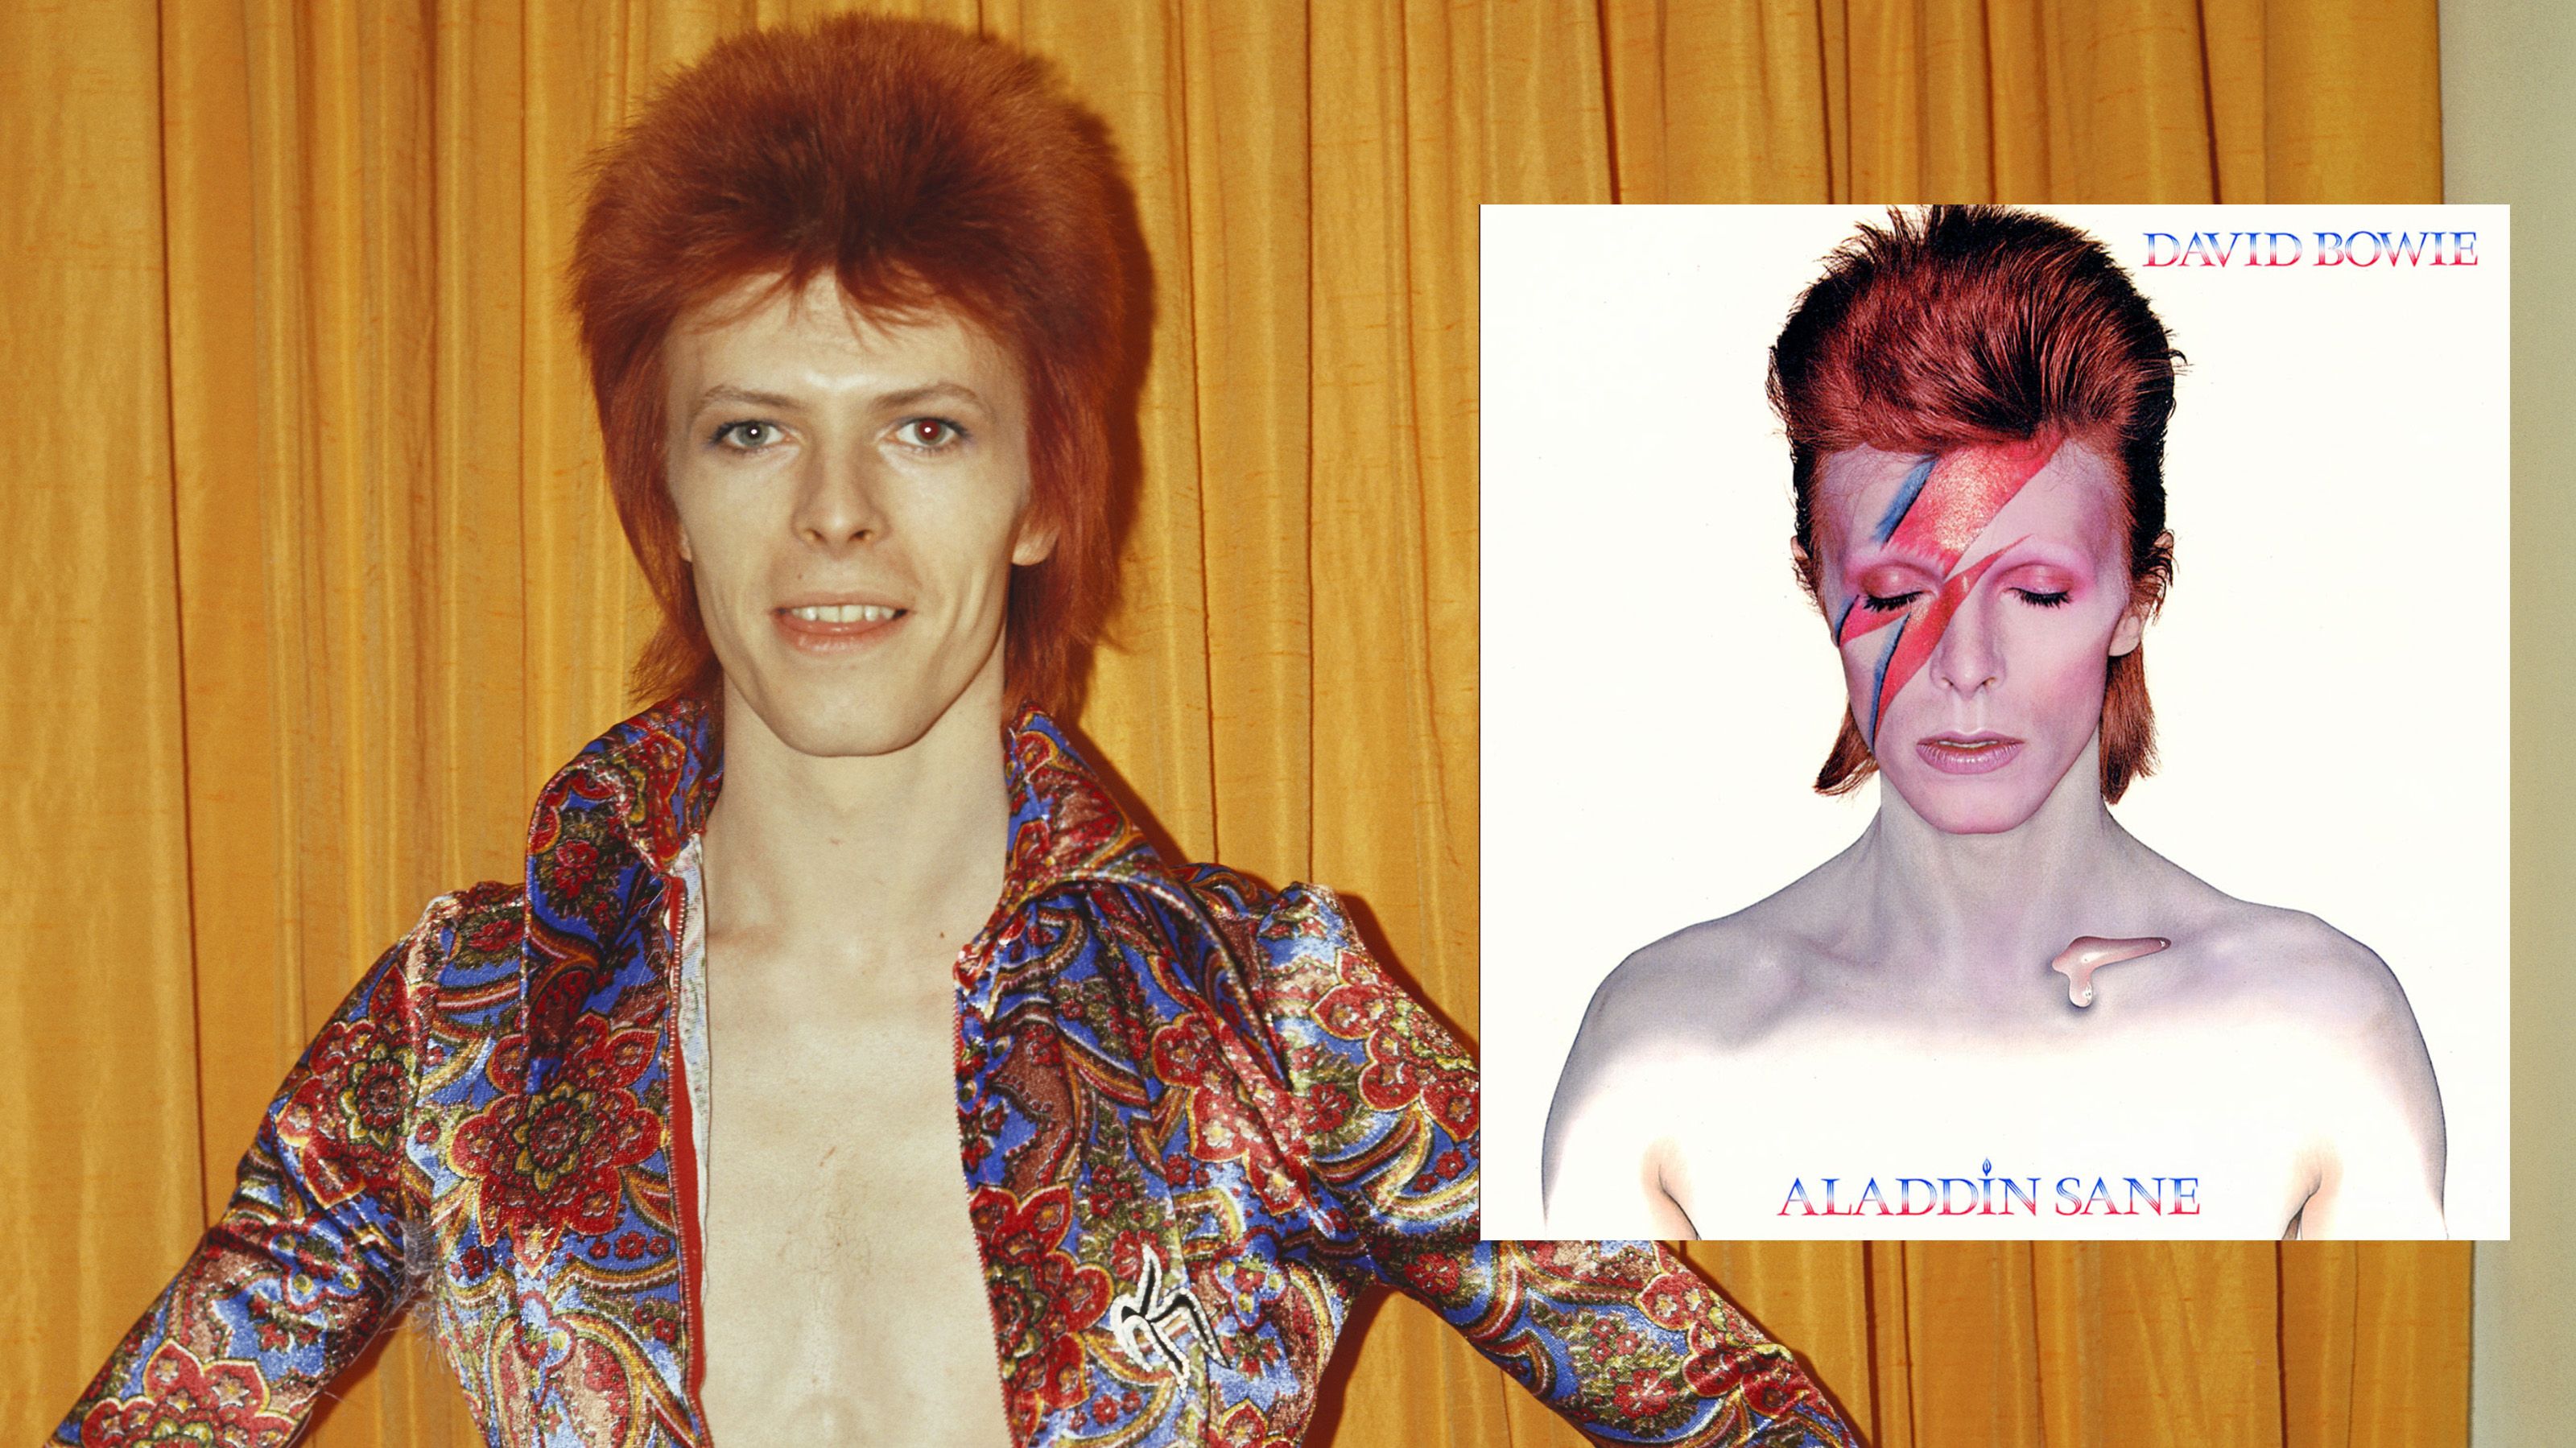 David Bowie's 'Aladdin Sane' is getting a limited-edition 50th anniversary  reissue